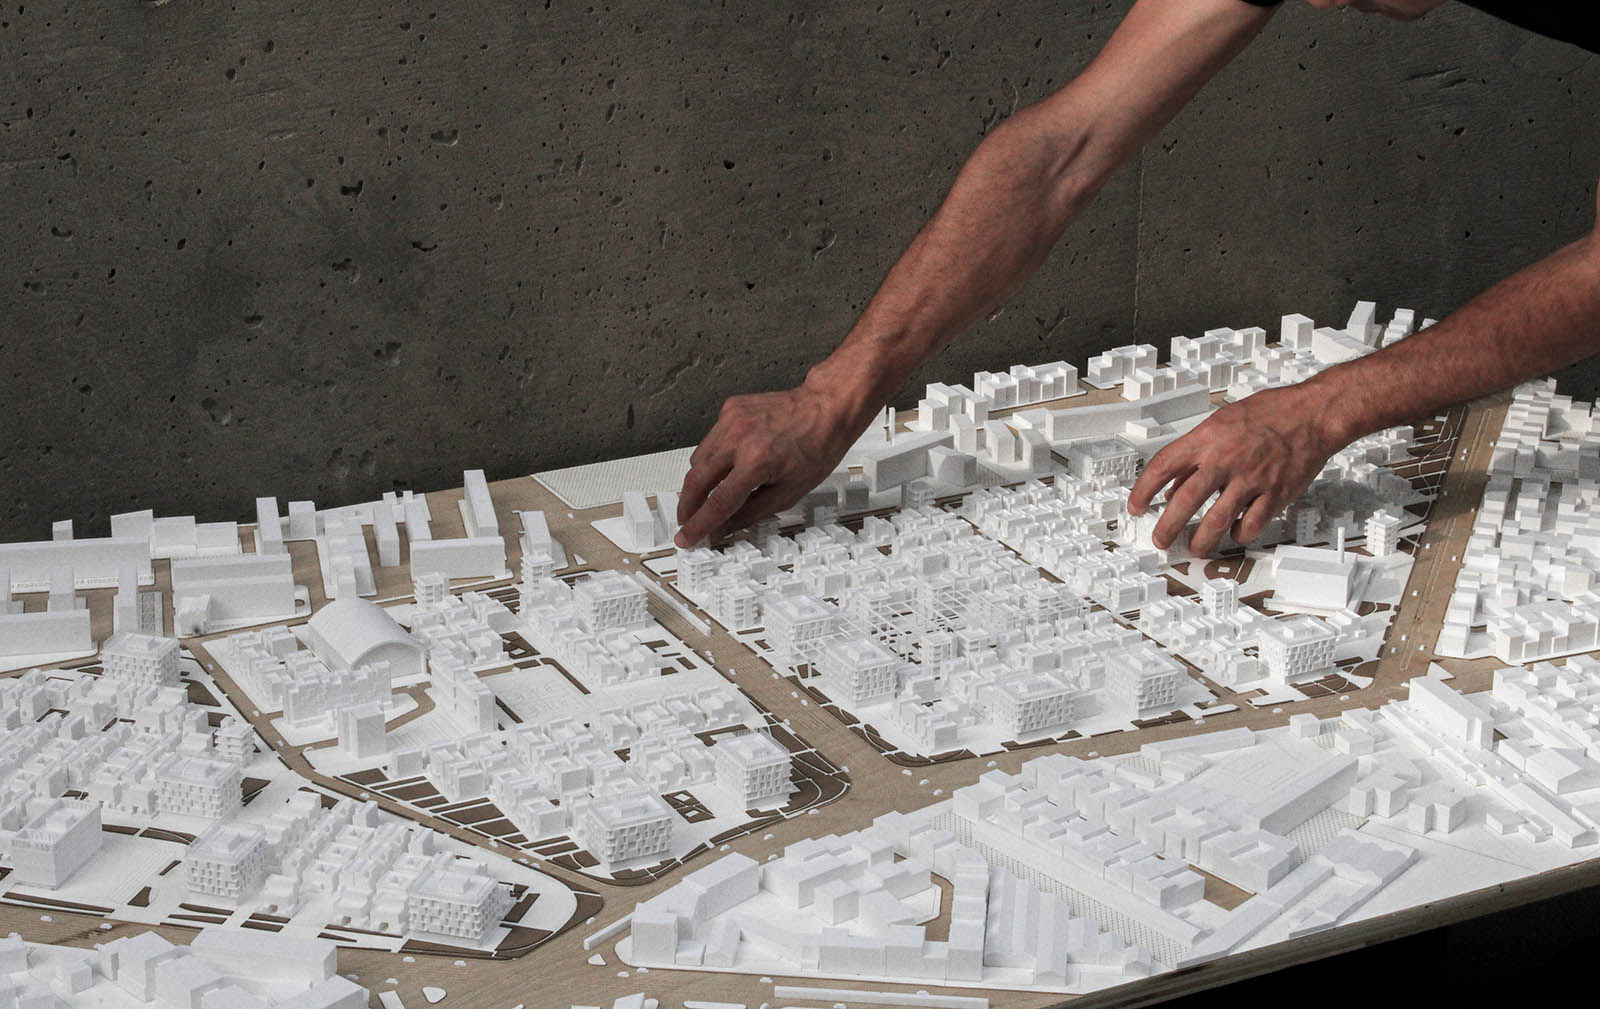 A photo of a physical model of a city with person's hands touching the model on the right side.